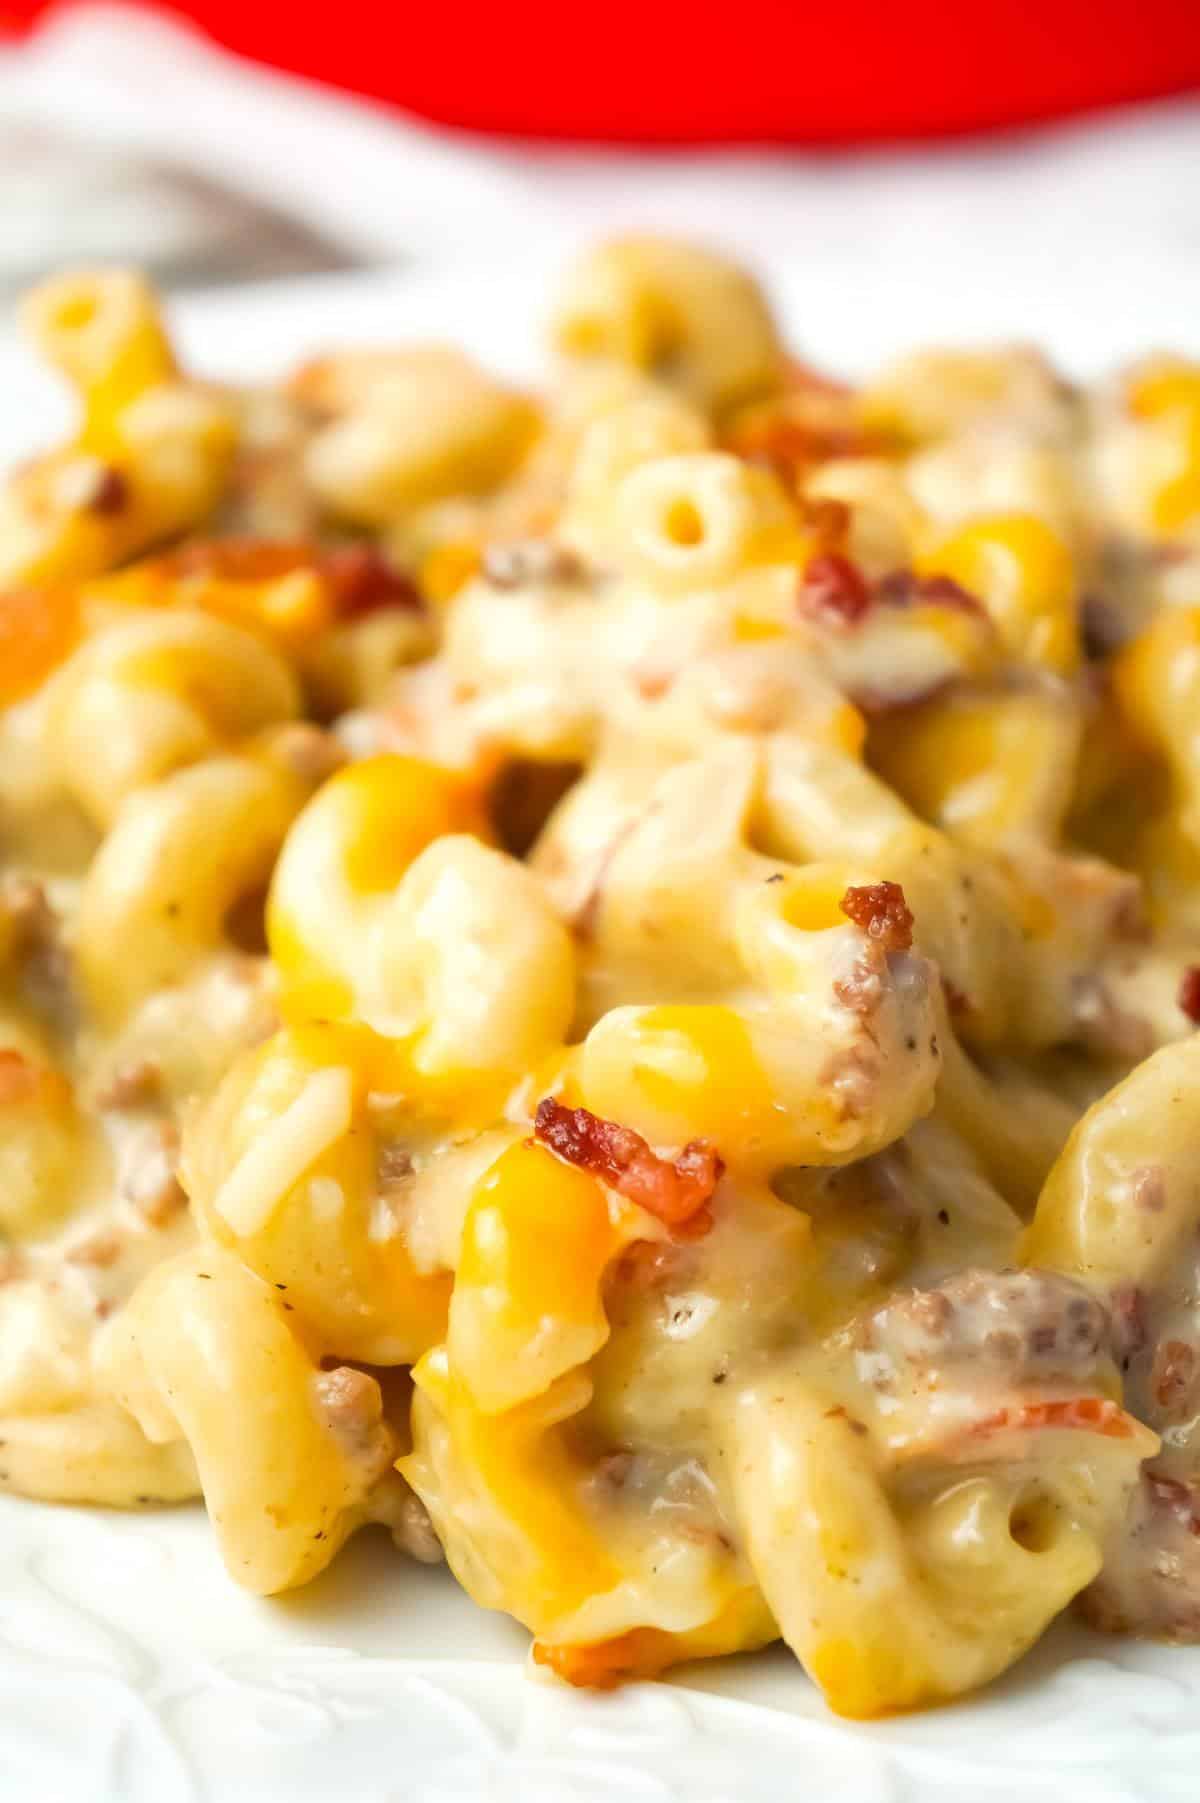 One Pot Bacon Cheeseburger Pasta is a creamy pasta recipe loaded with ground beef, crumbled bacon, mozzarella and cheddar cheese.